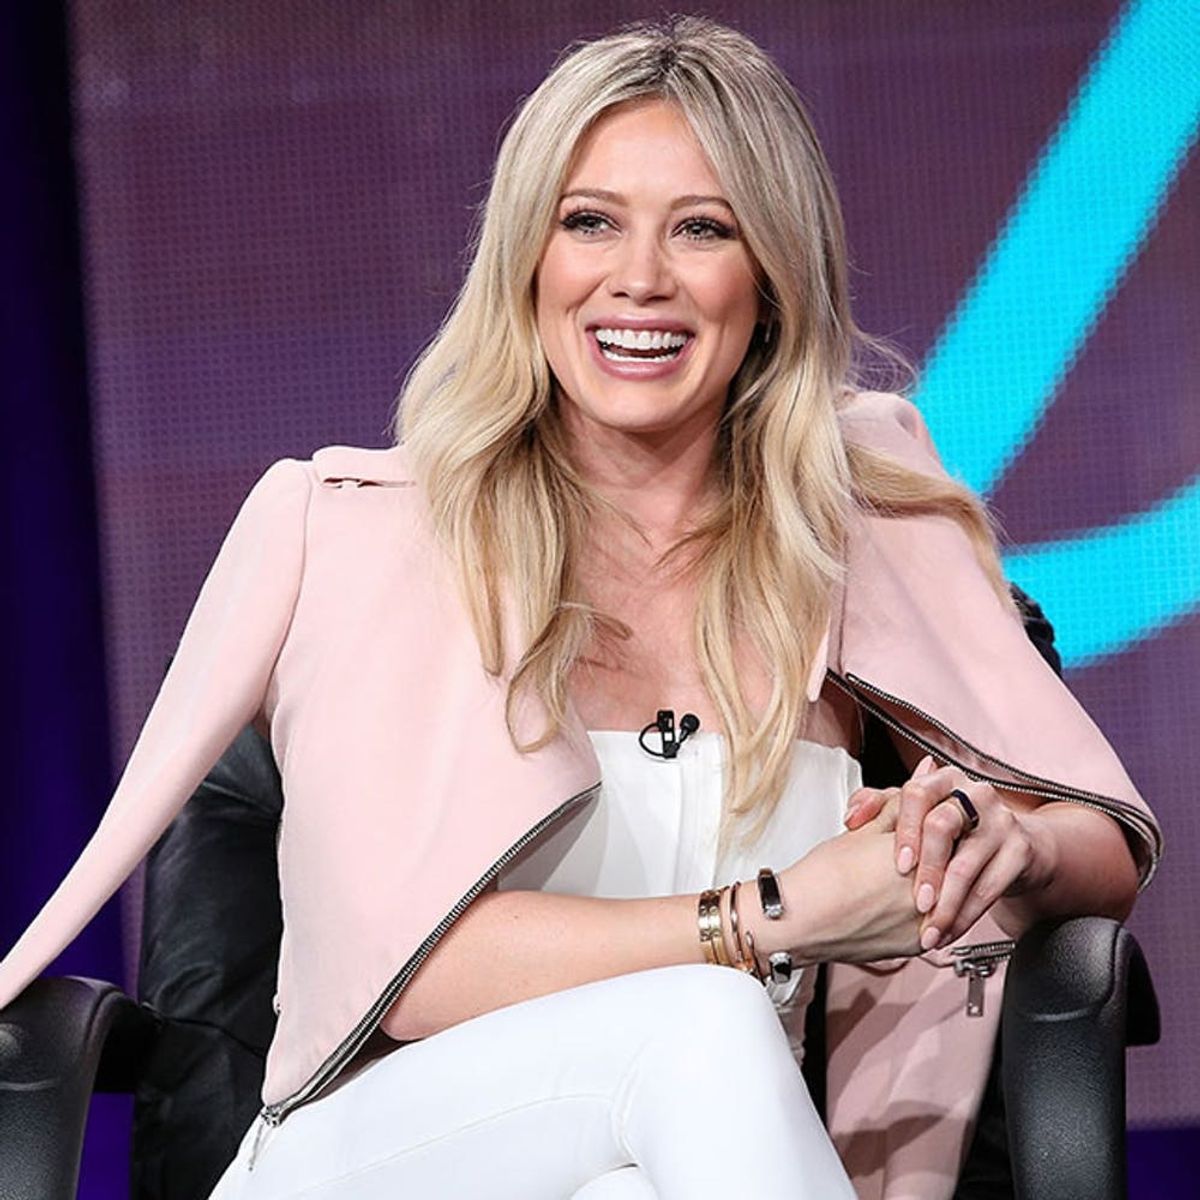 Hilary Duff Just Dyed Her Hair This Beautiful Beach-Inspired Hue